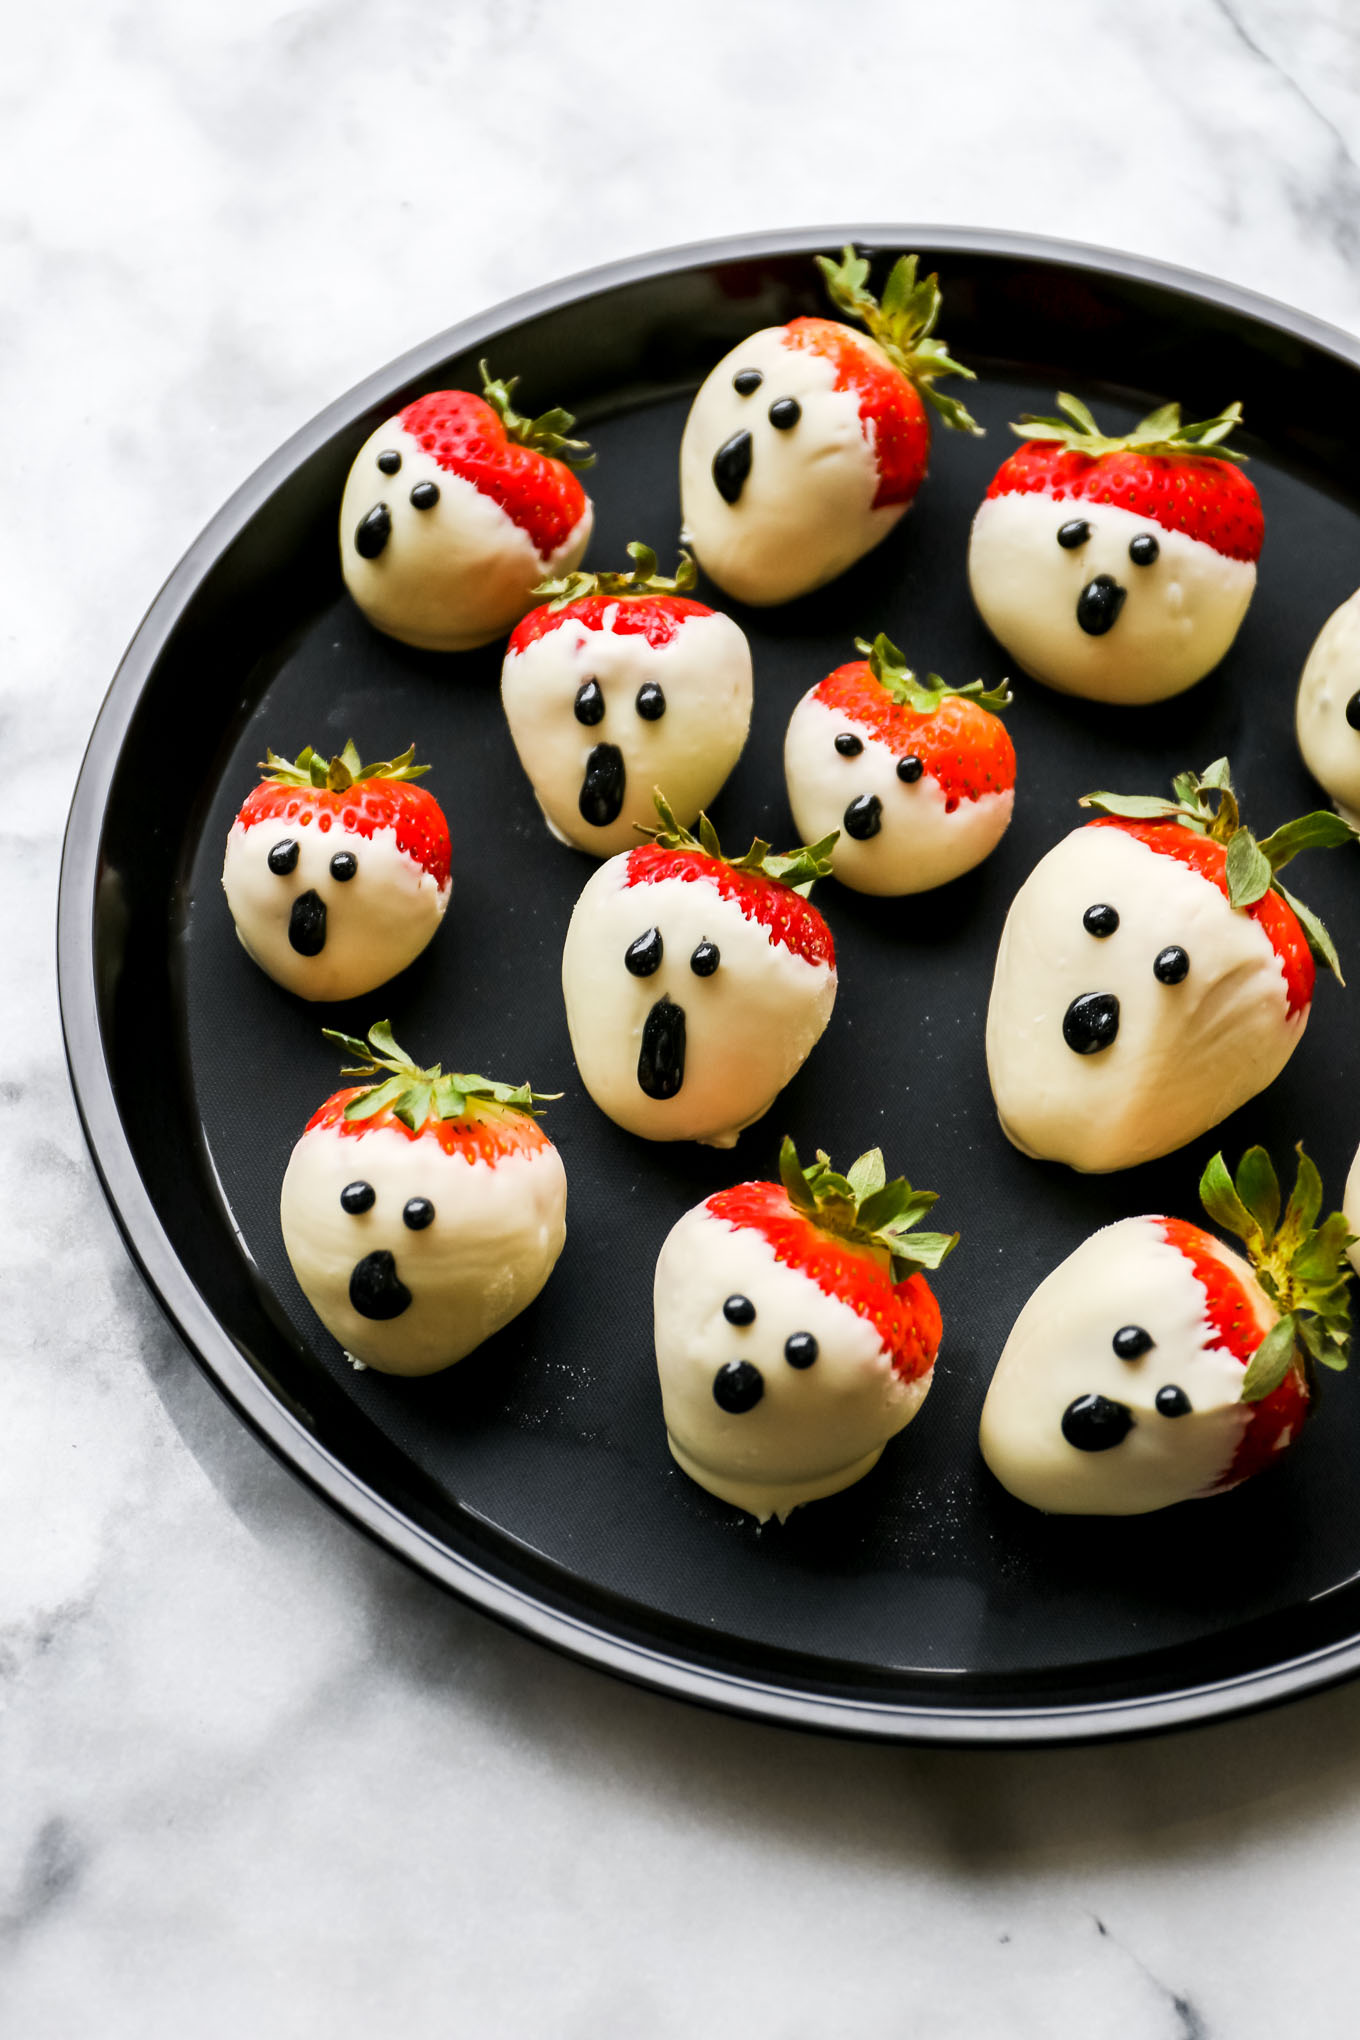 kid friendly halloween party food - chocolate dipped strawberry ghosts